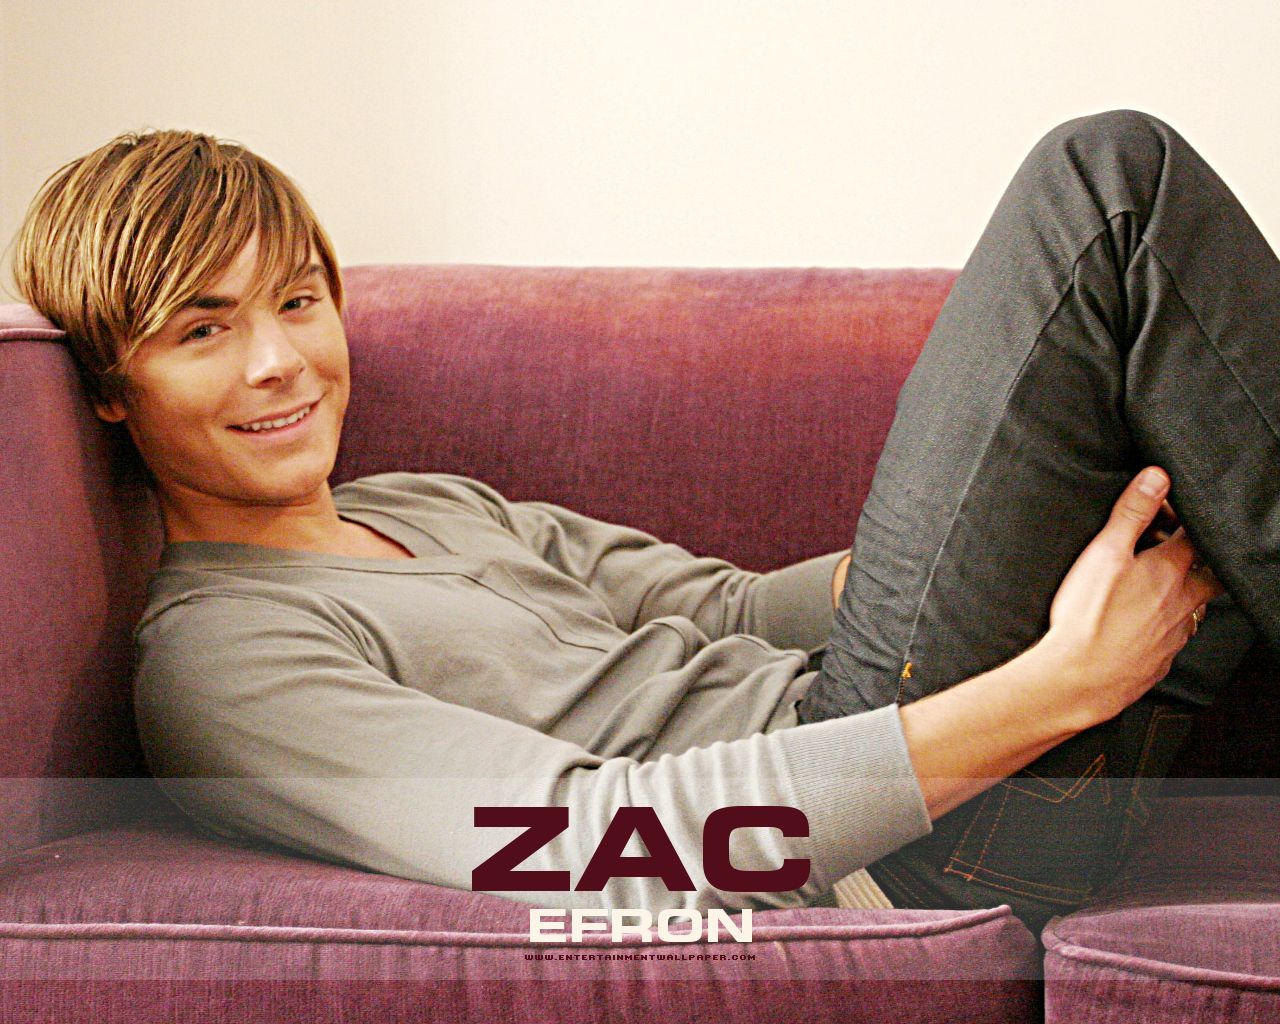 Zac Efron hd Wallpapers 2012 All Hollywood Stars